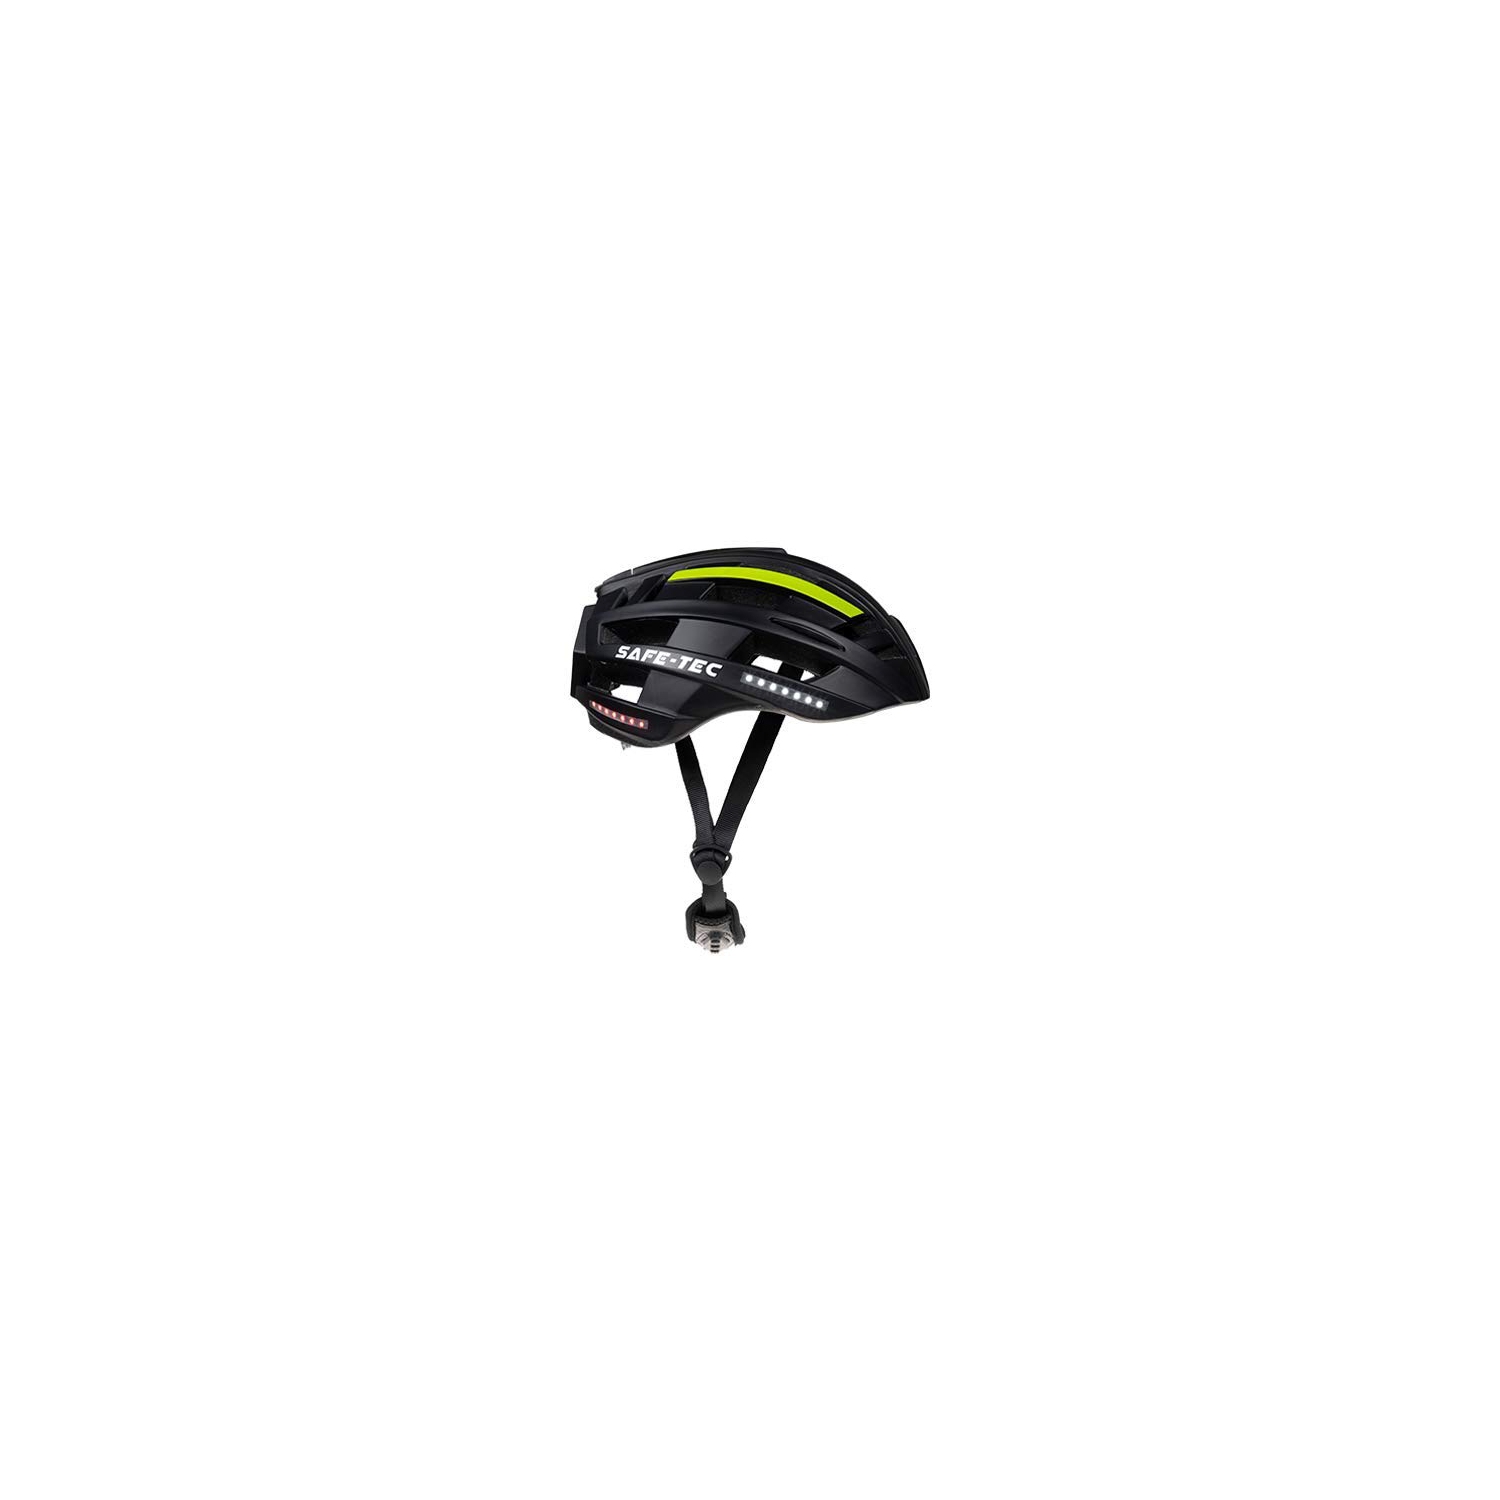 Safe-Tec Asgard Bicycle Smart Helmet with MIPS & Turn Signals and Bone Conduction Speakers (Black Green, Large)